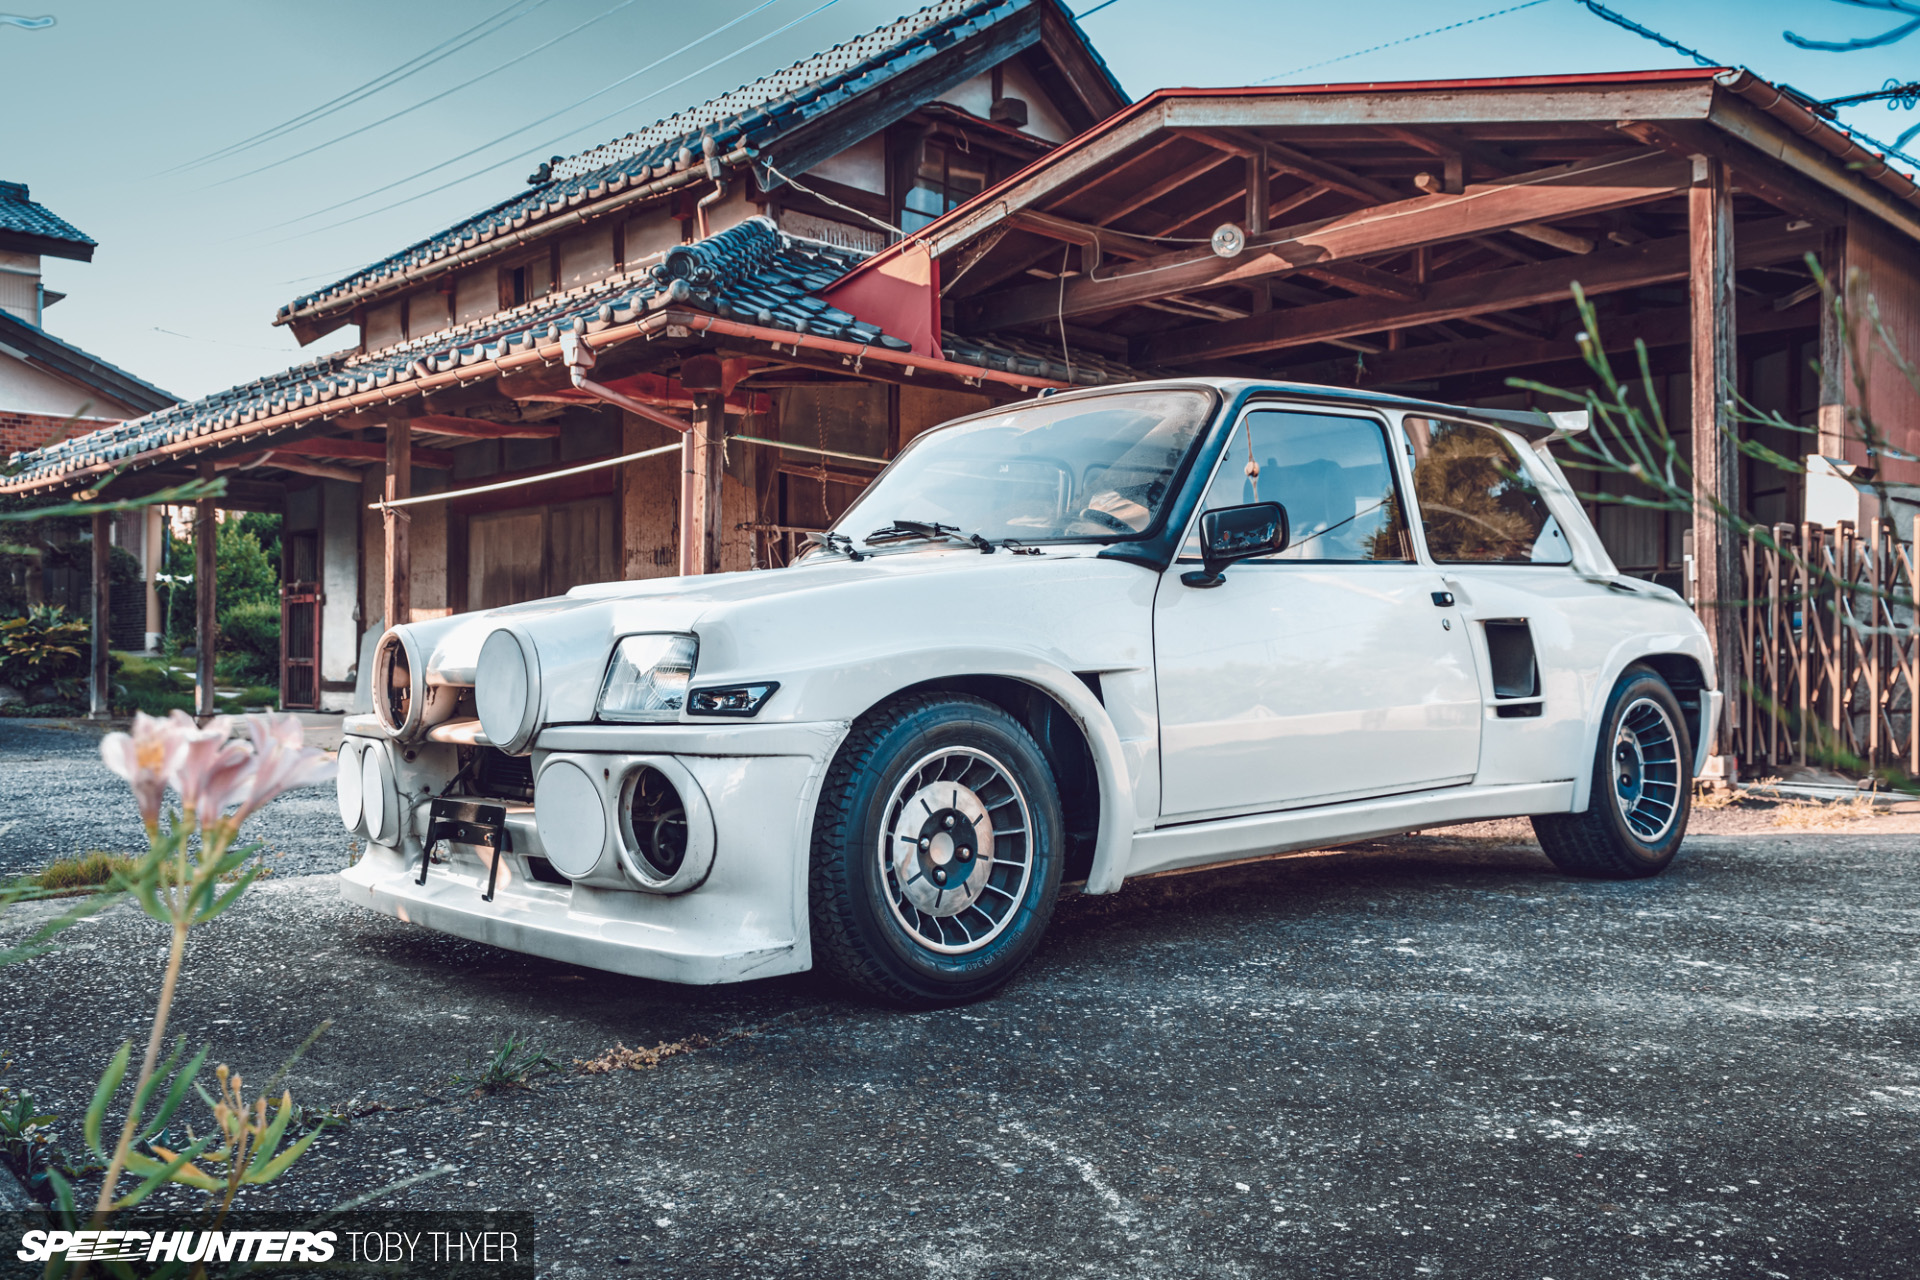 Besparing rol tijdschrift How Cool Is This R5 Turbo Resto Project? - Speedhunters